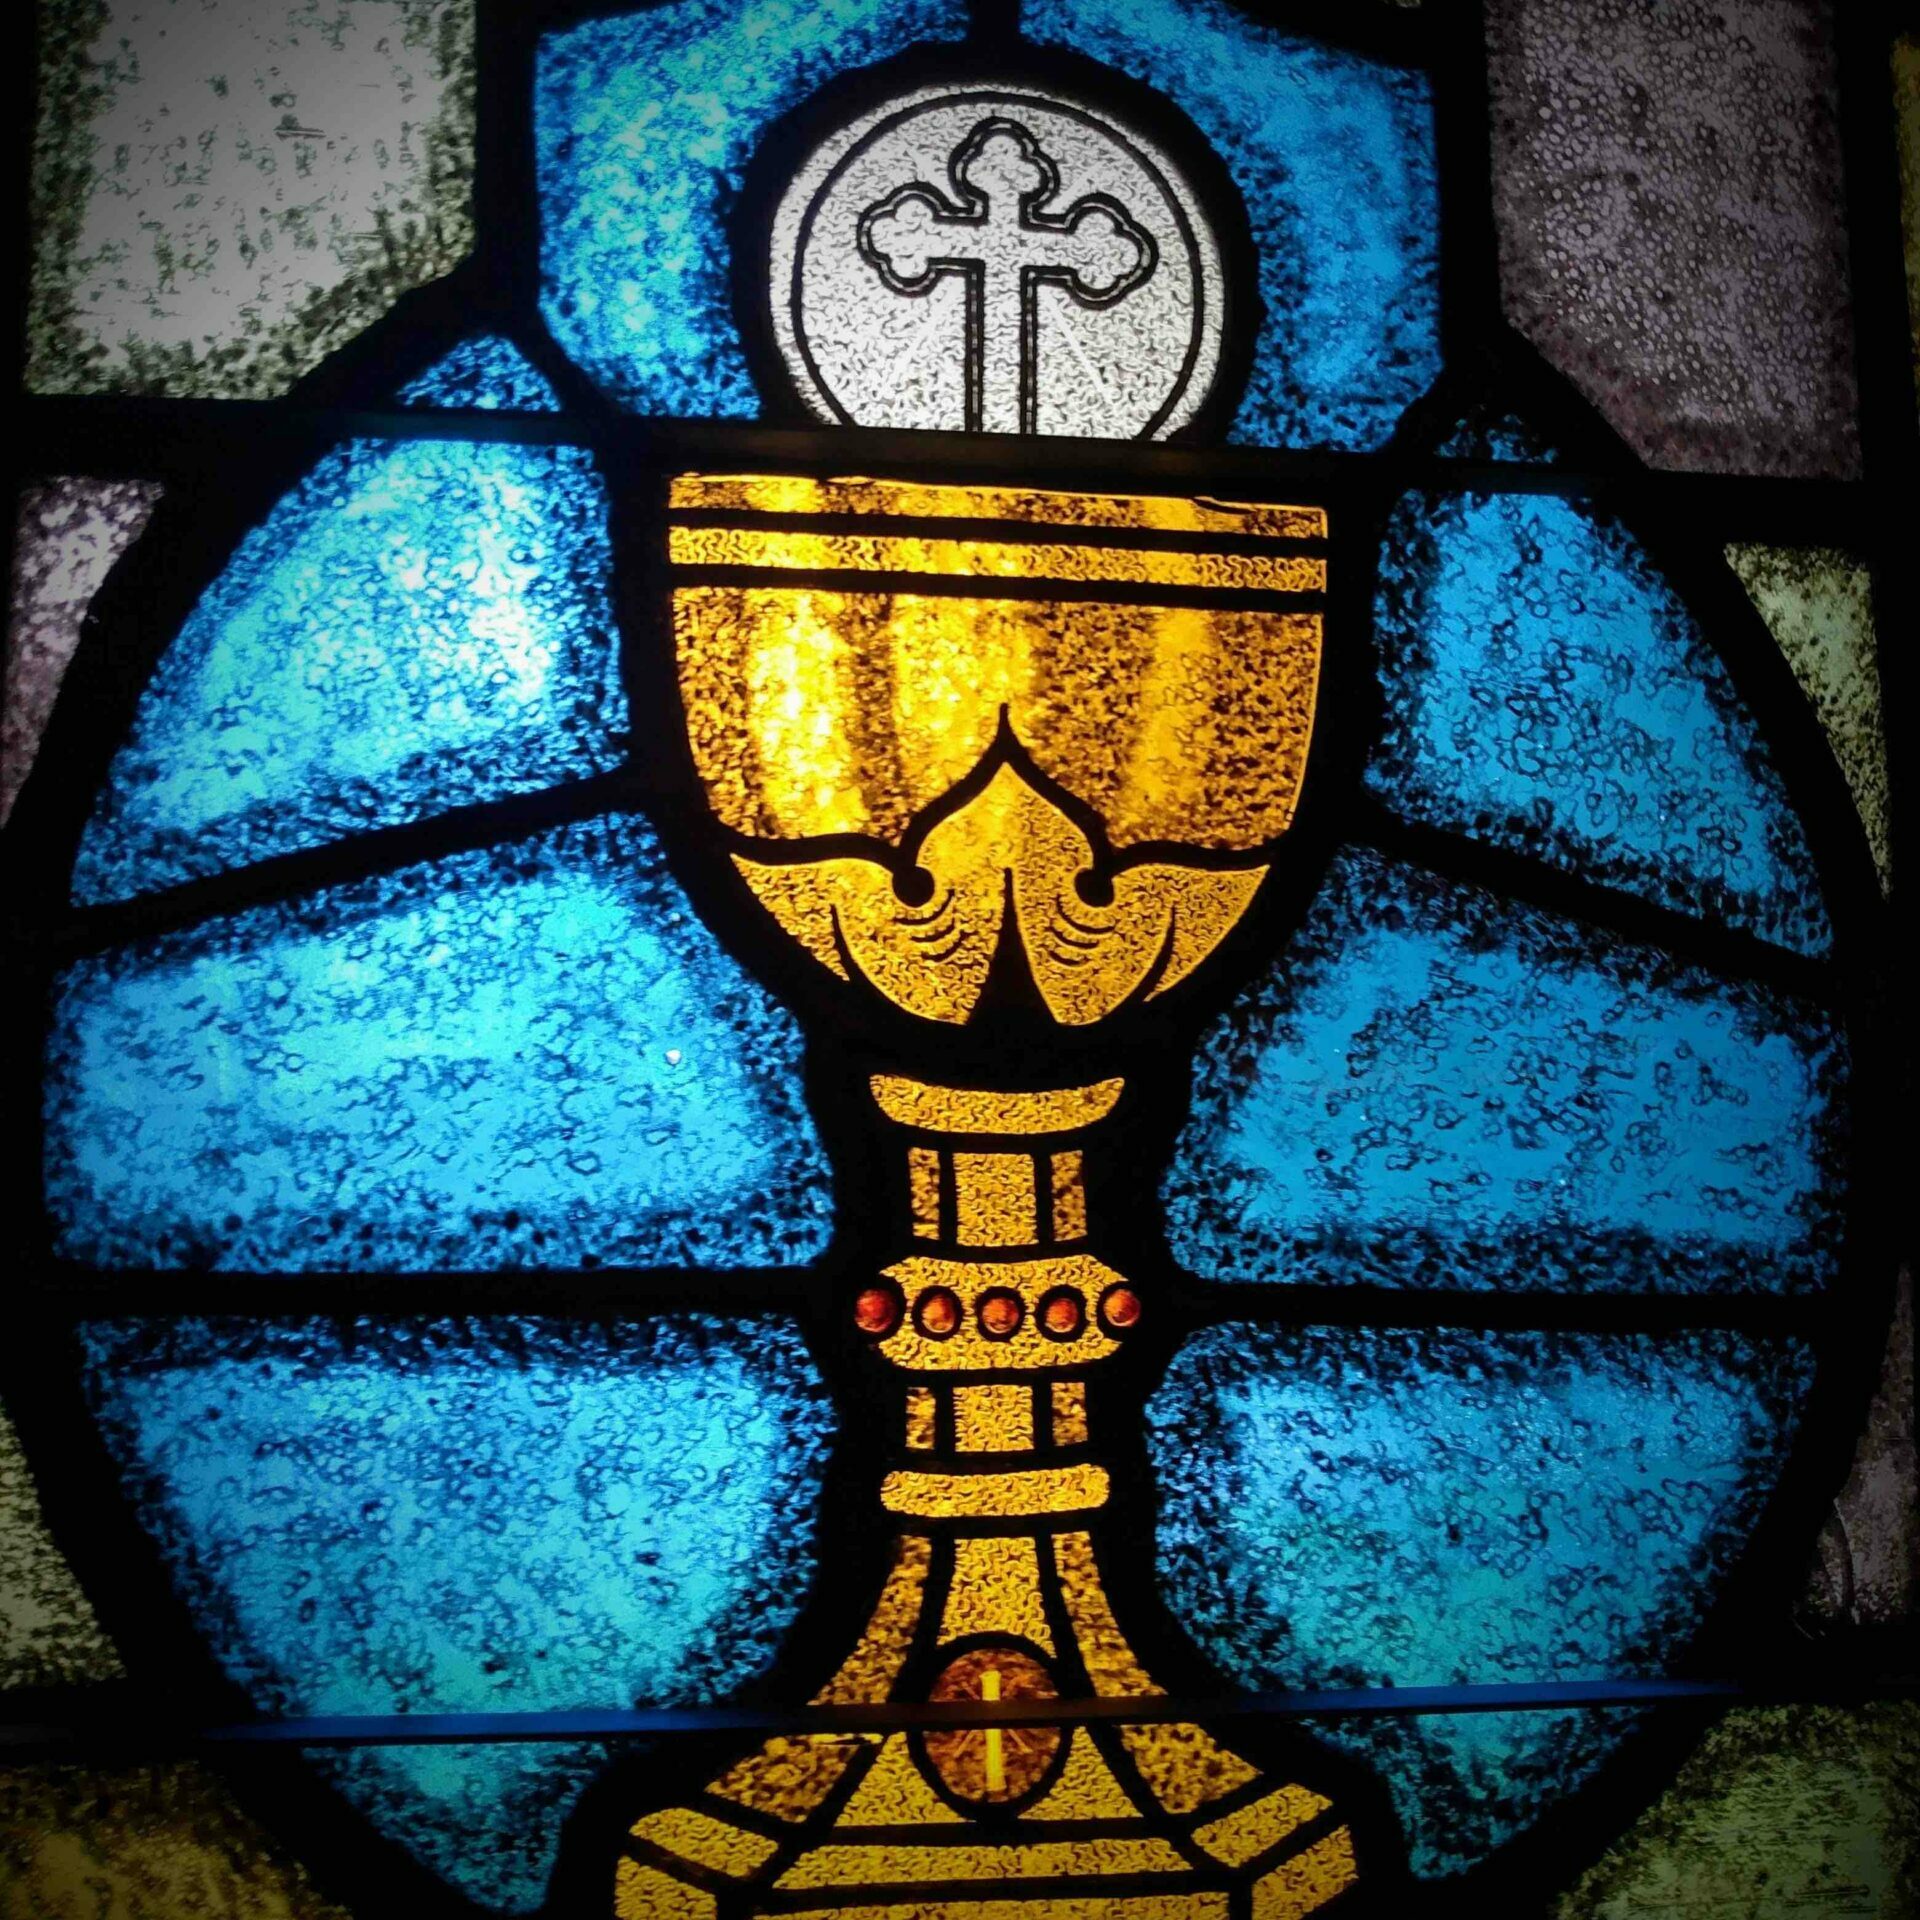 this is another of the many beautiful stained glass windows at my church.  The Holy Eucharist with represents the body the Body of Christ.